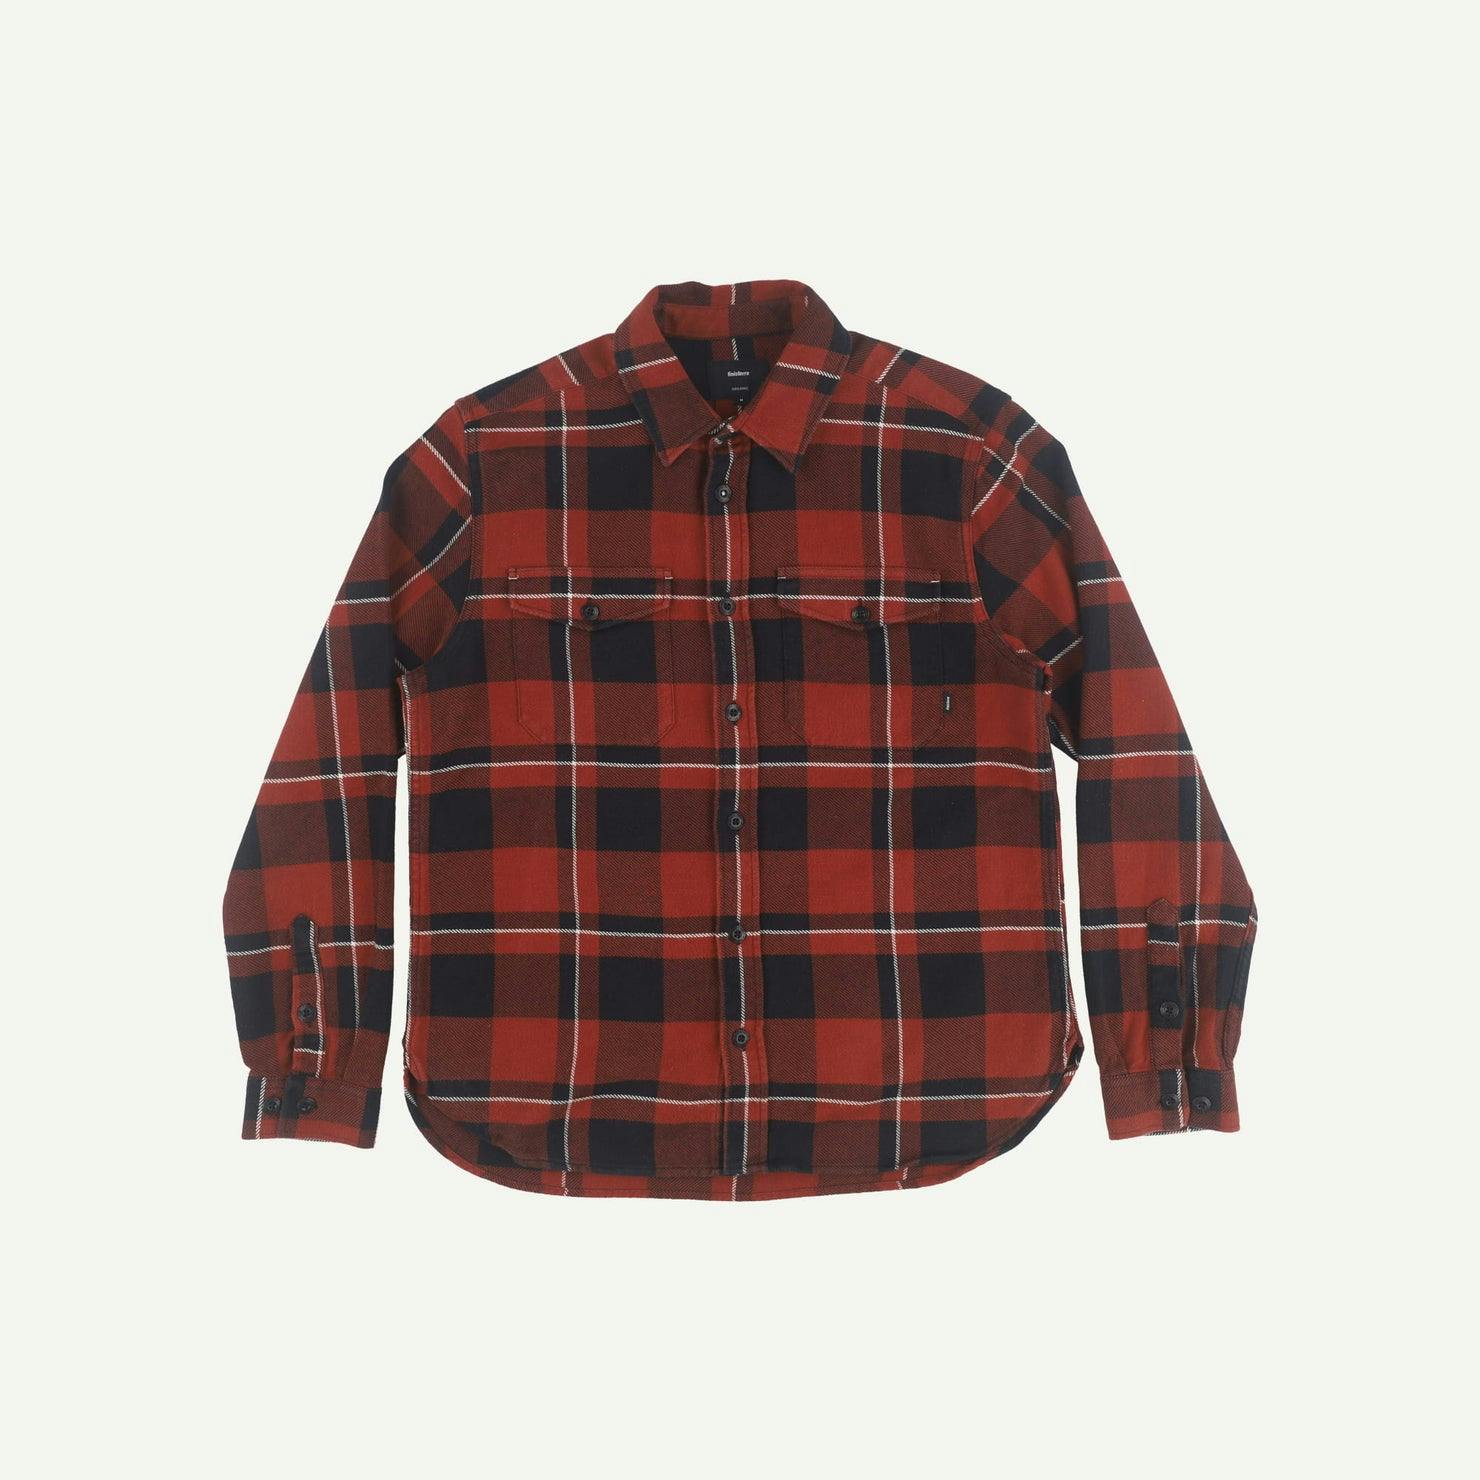 Finisterre Pre-loved Red Shirt